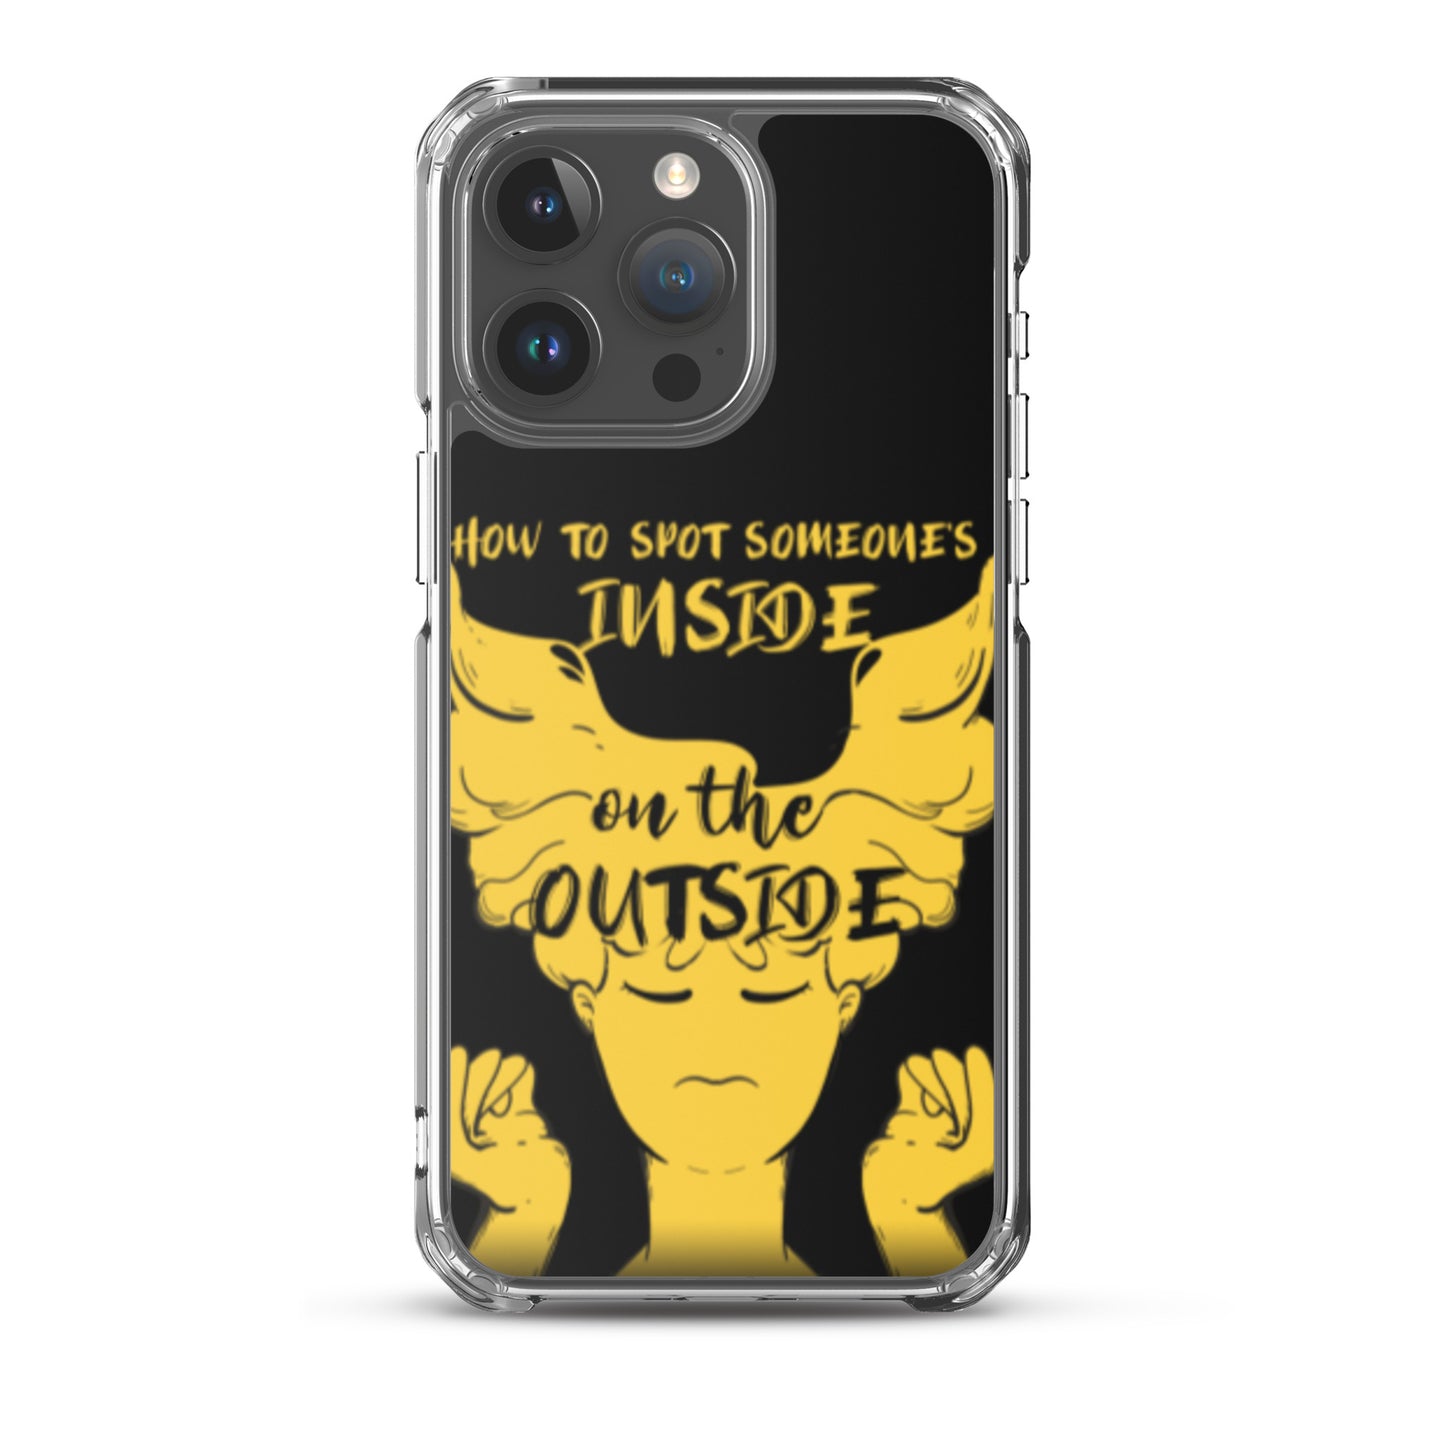 How to spot someone's inside on the outside iPhone Case